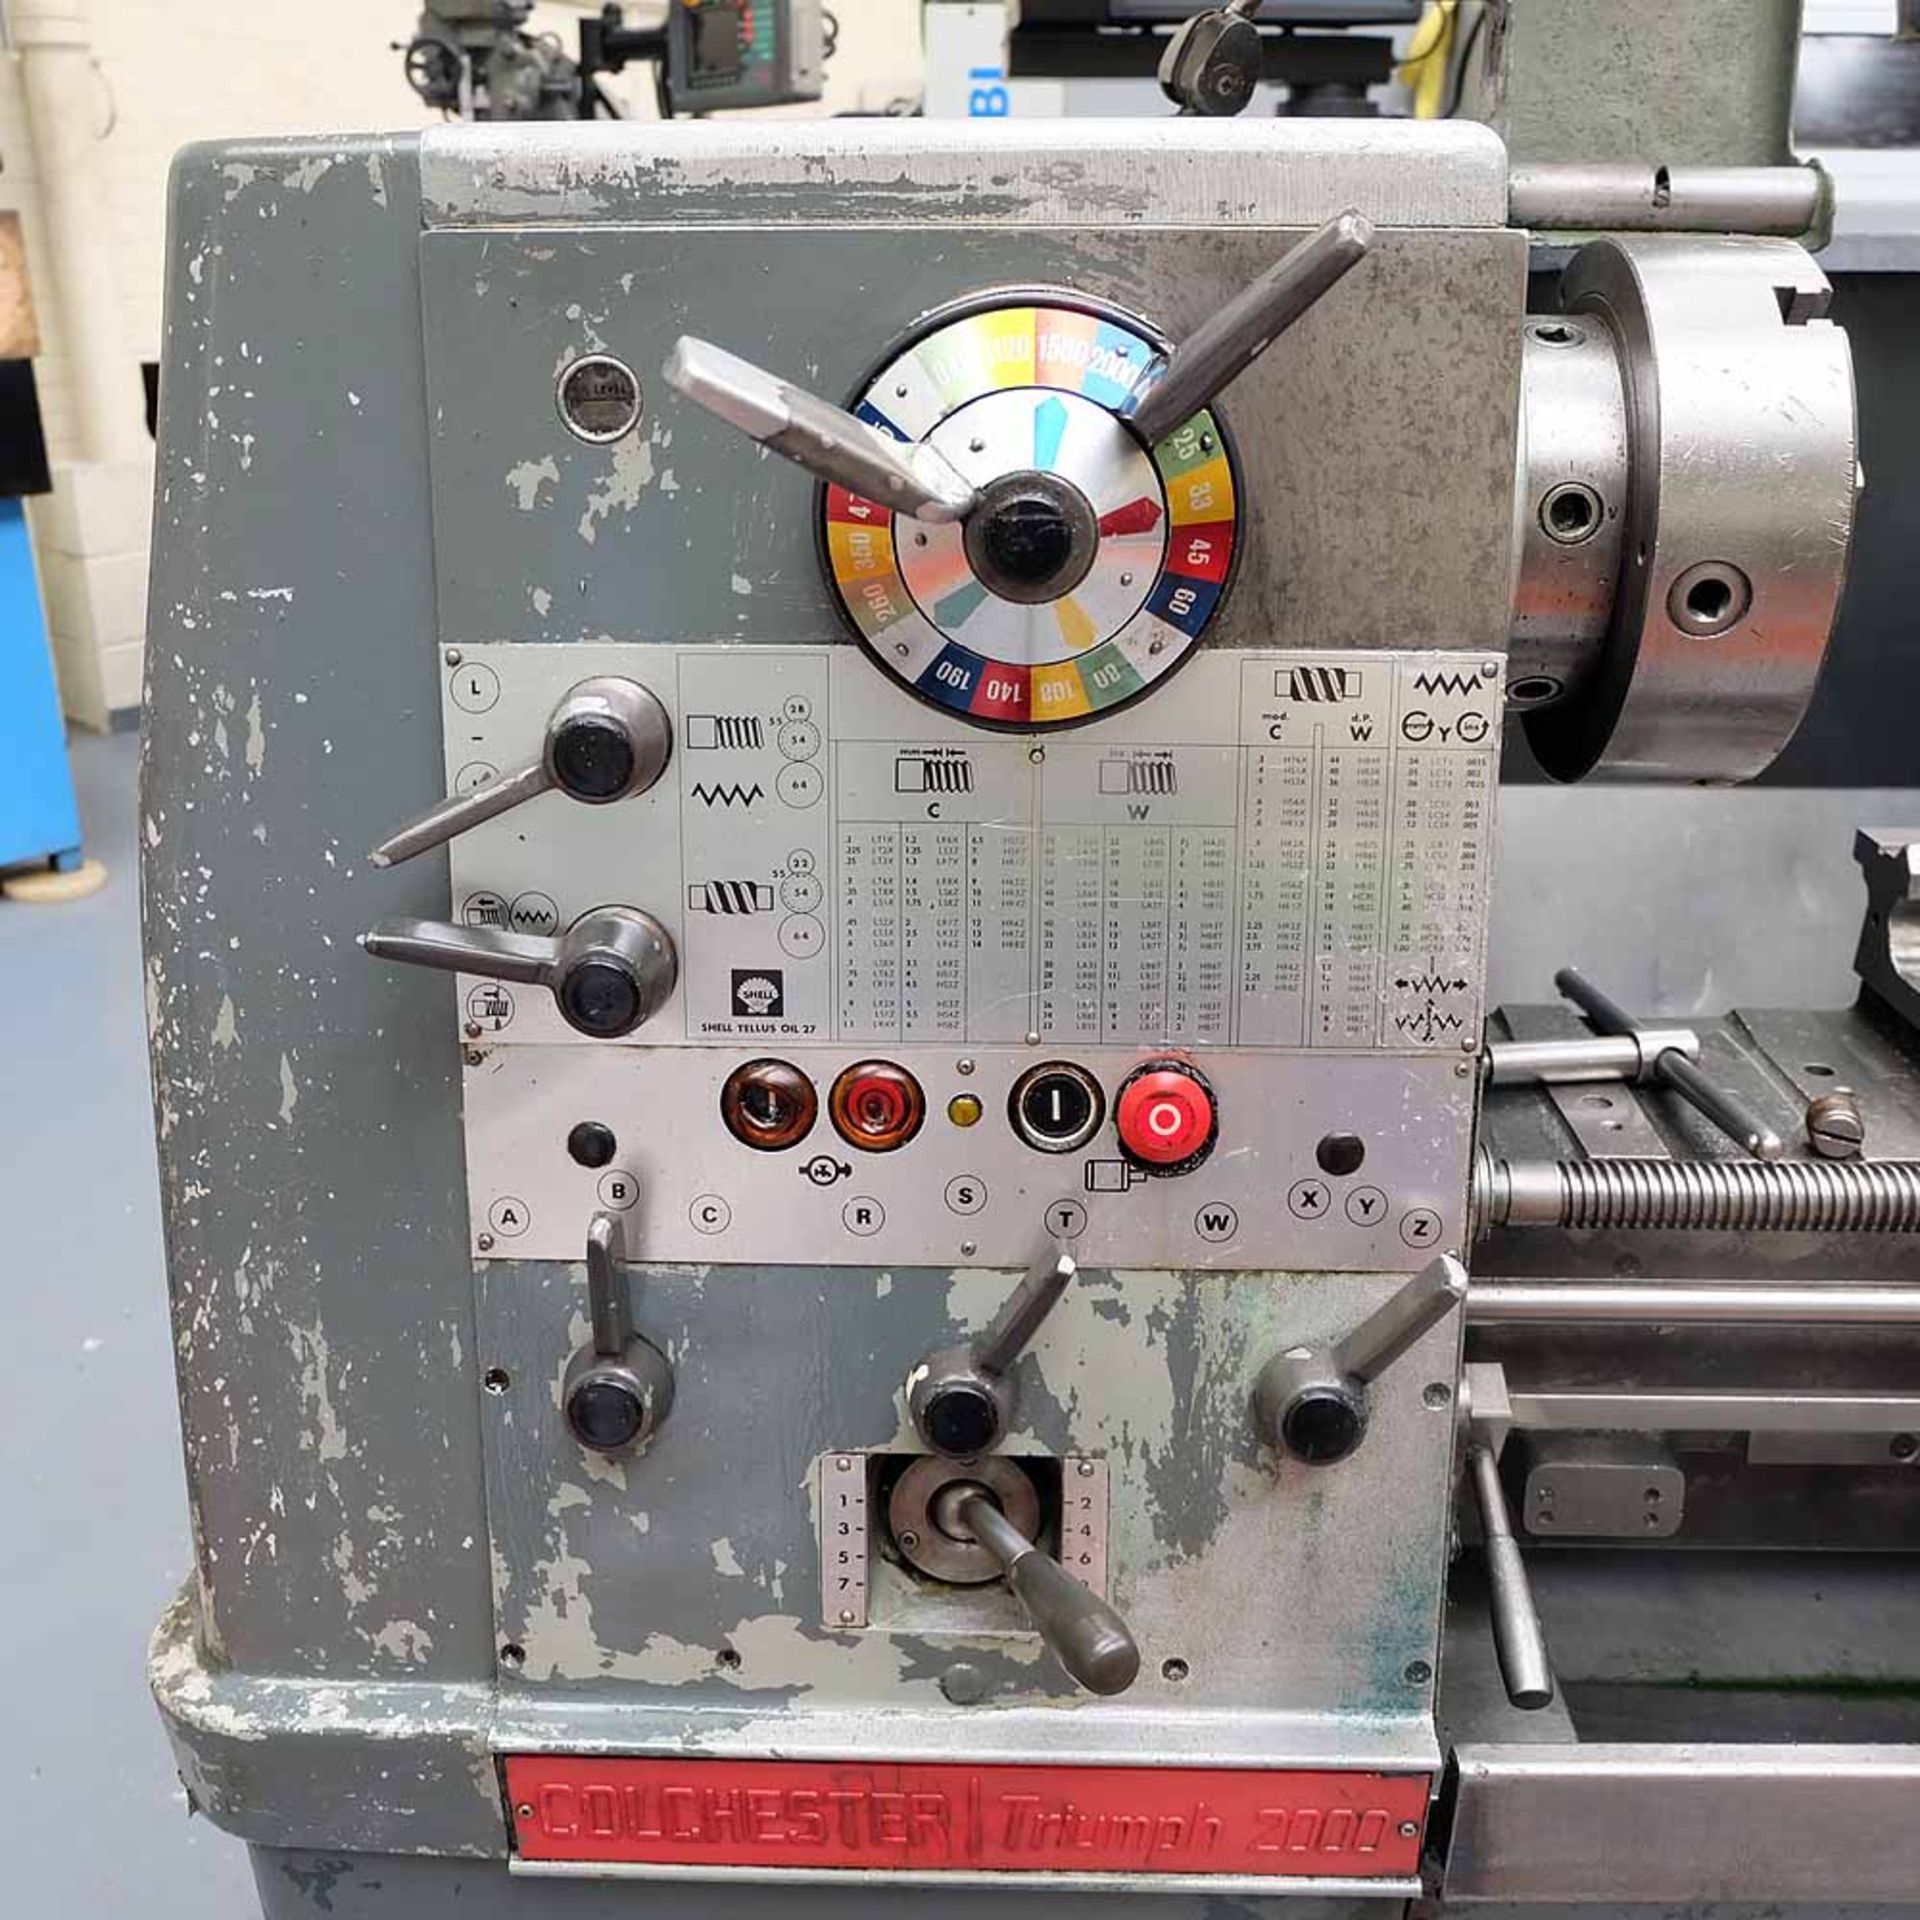 Colchester Triumph 2000 Gap Bed Centre Lathe. Capacity 15" Diameter x 50" Between Centres. - Image 2 of 10